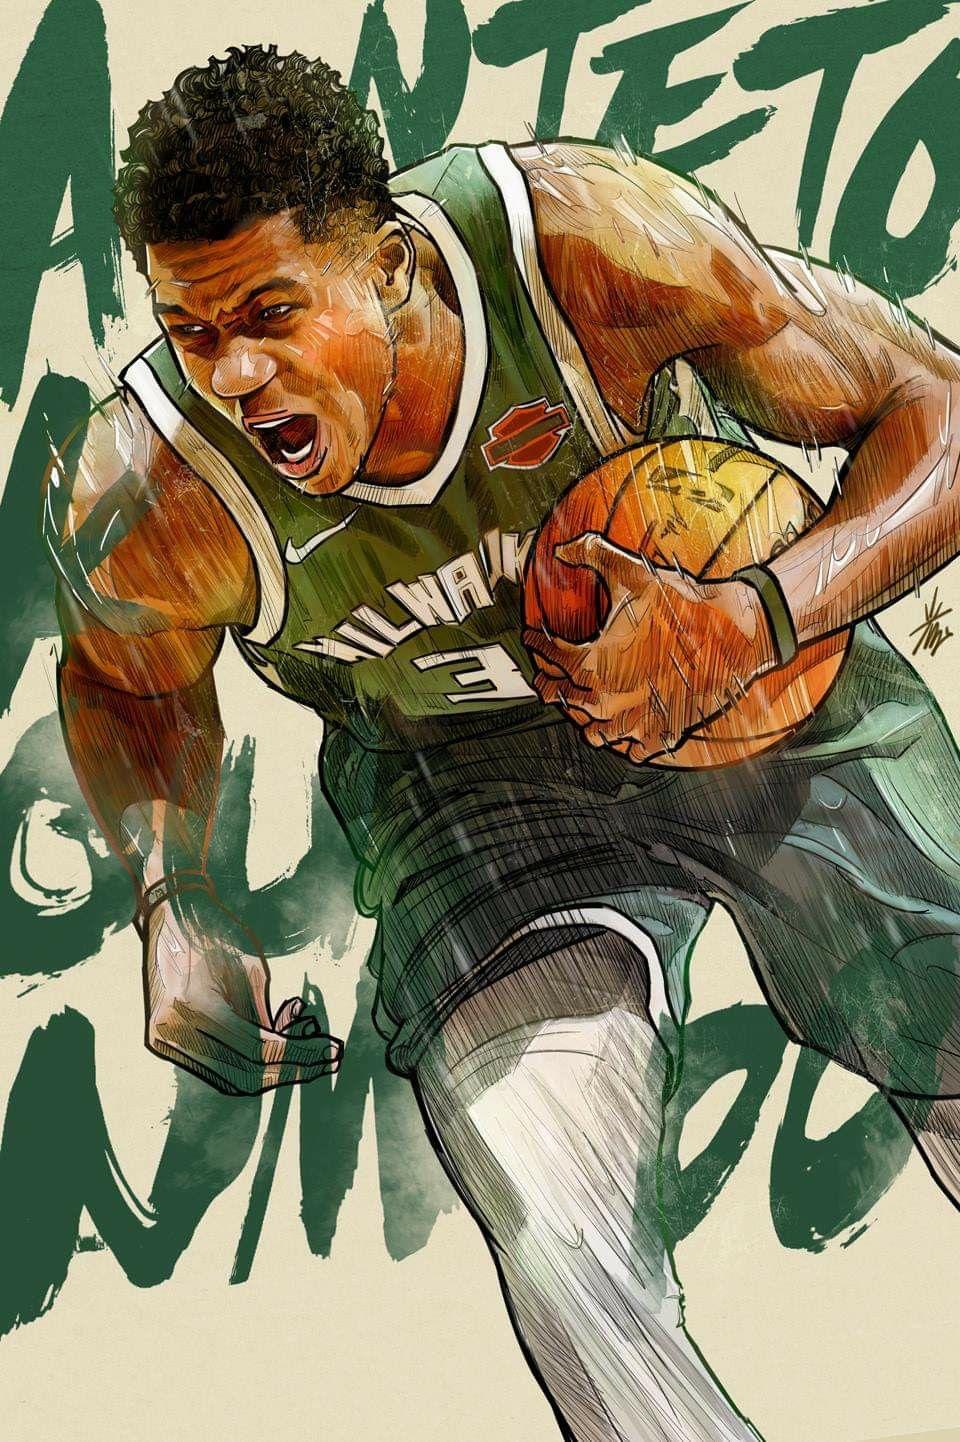 Share 60+ cool giannis wallpapers super hot - in.cdgdbentre